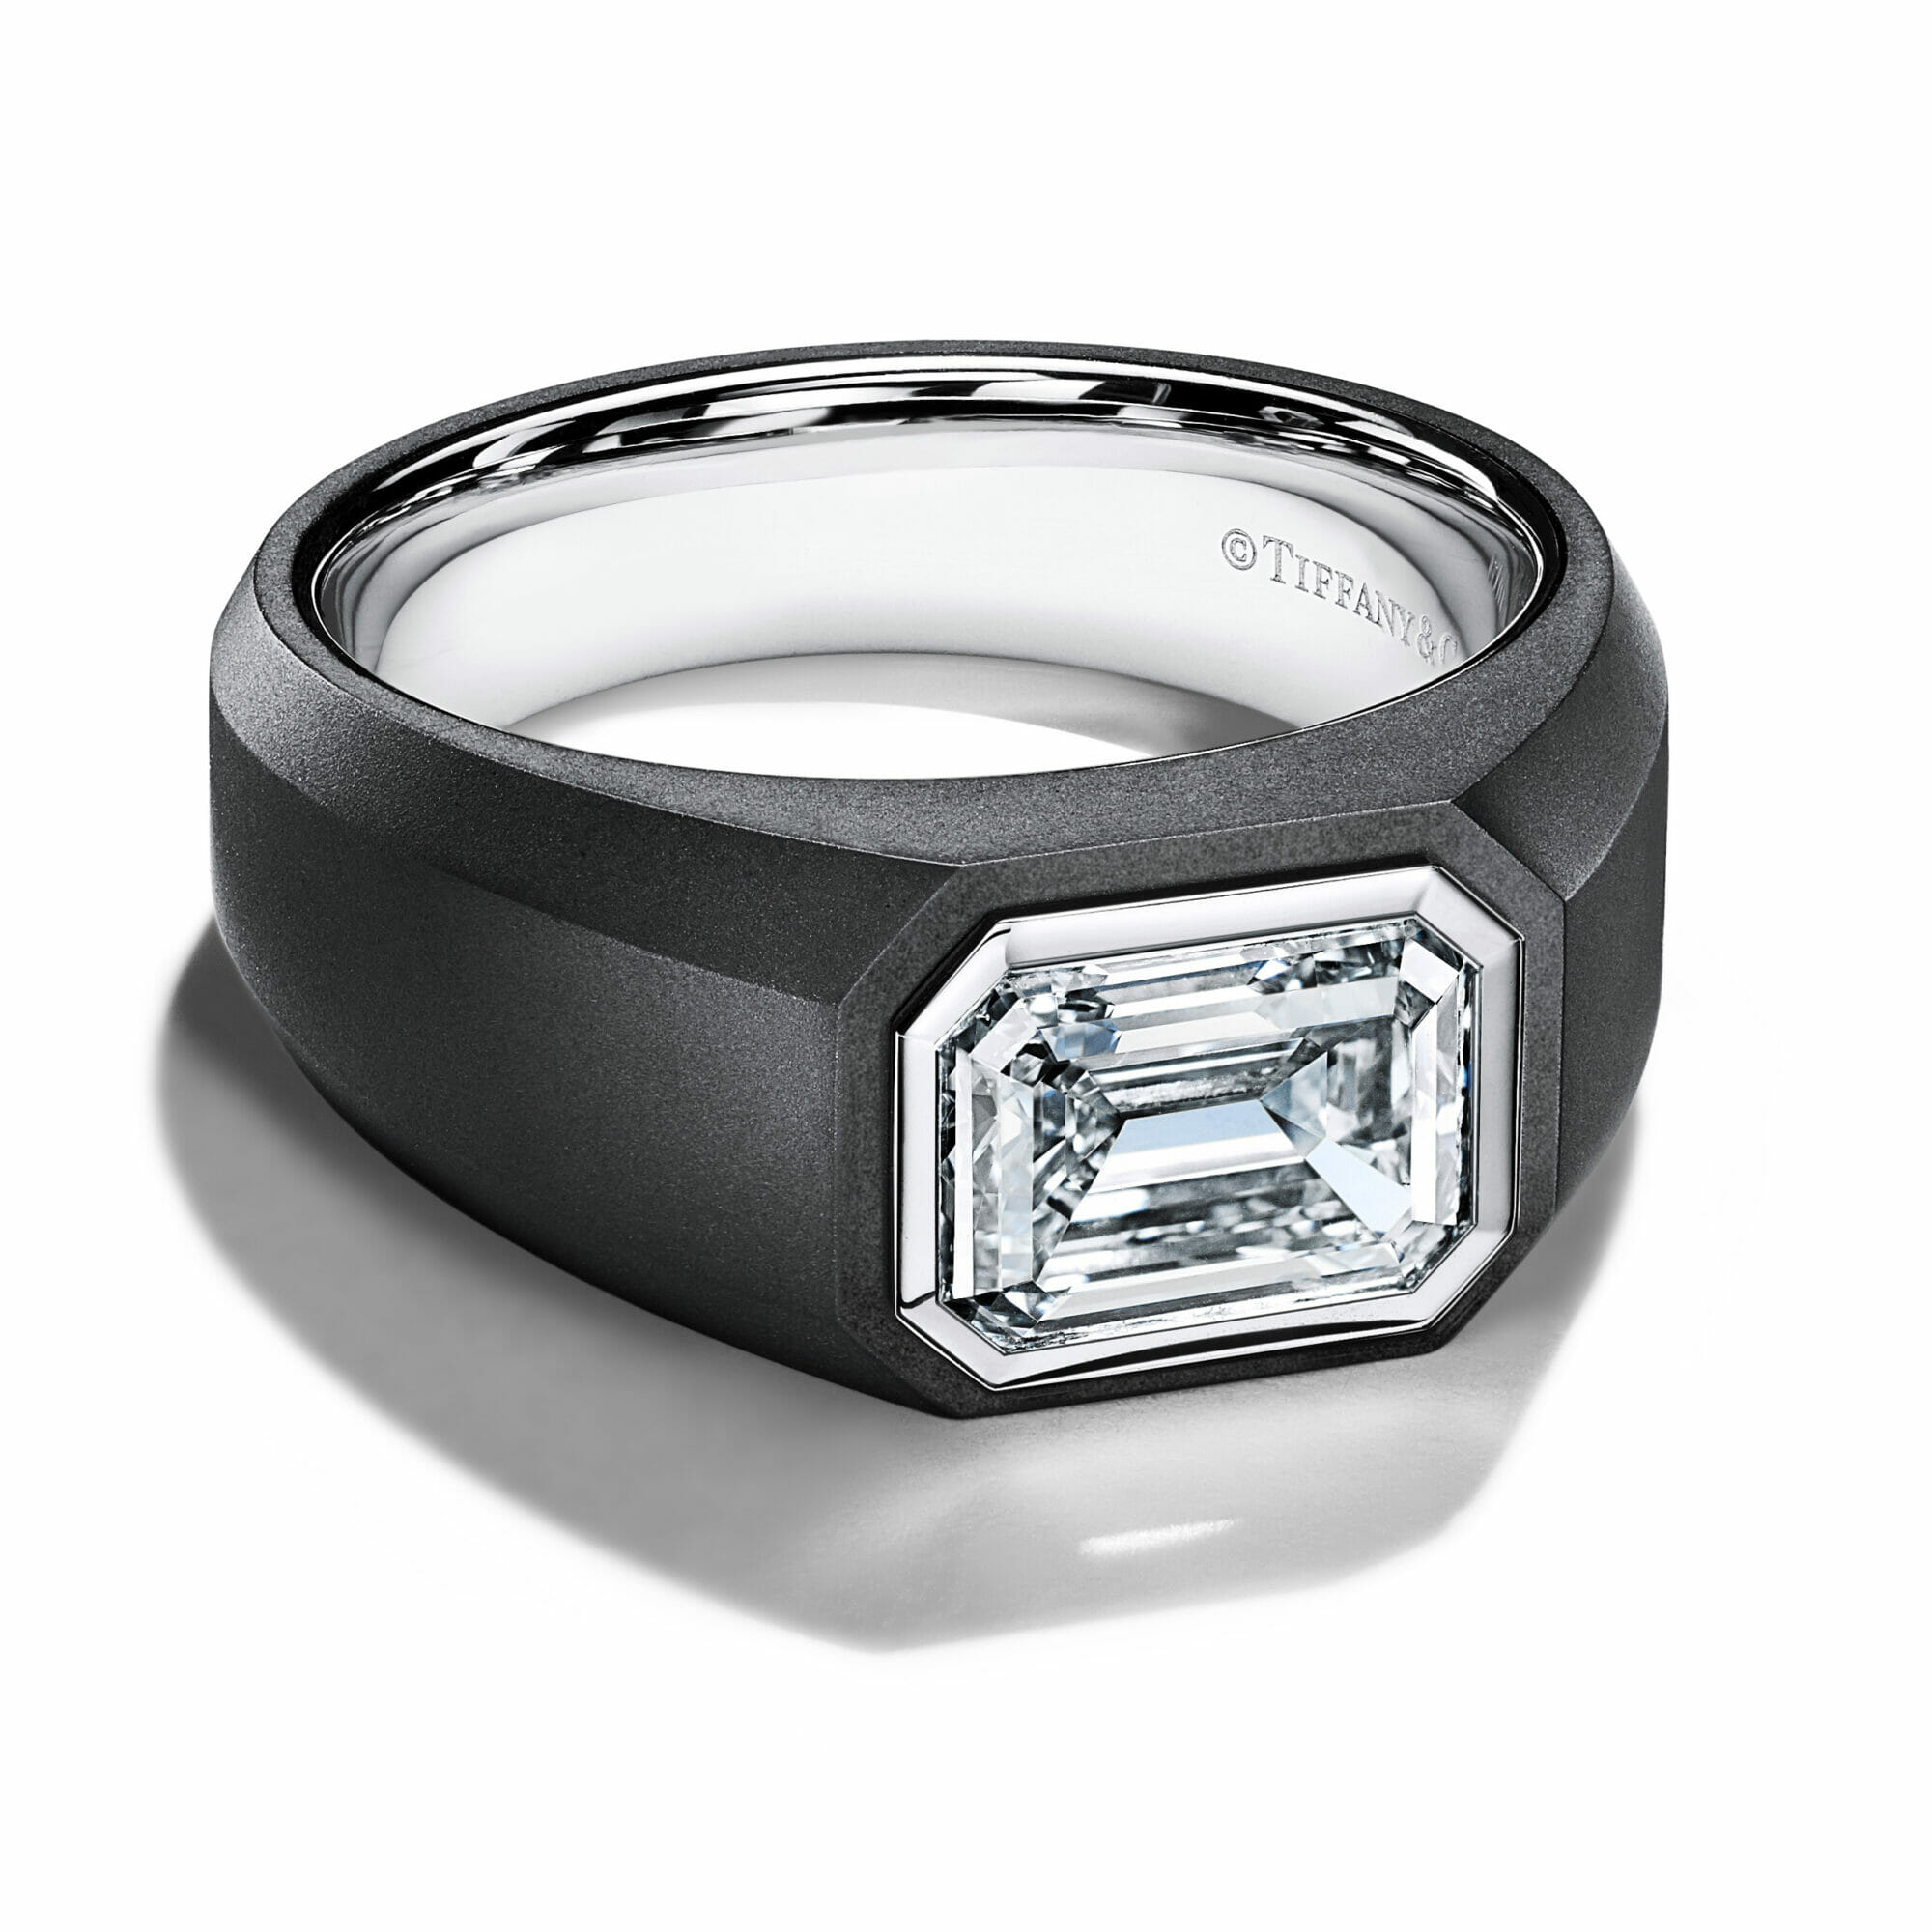 Op grote schaal ding sarcoom Tiffany & Co. Debuts Diamond Engagement Rings For Men - Only Natural  Diamonds